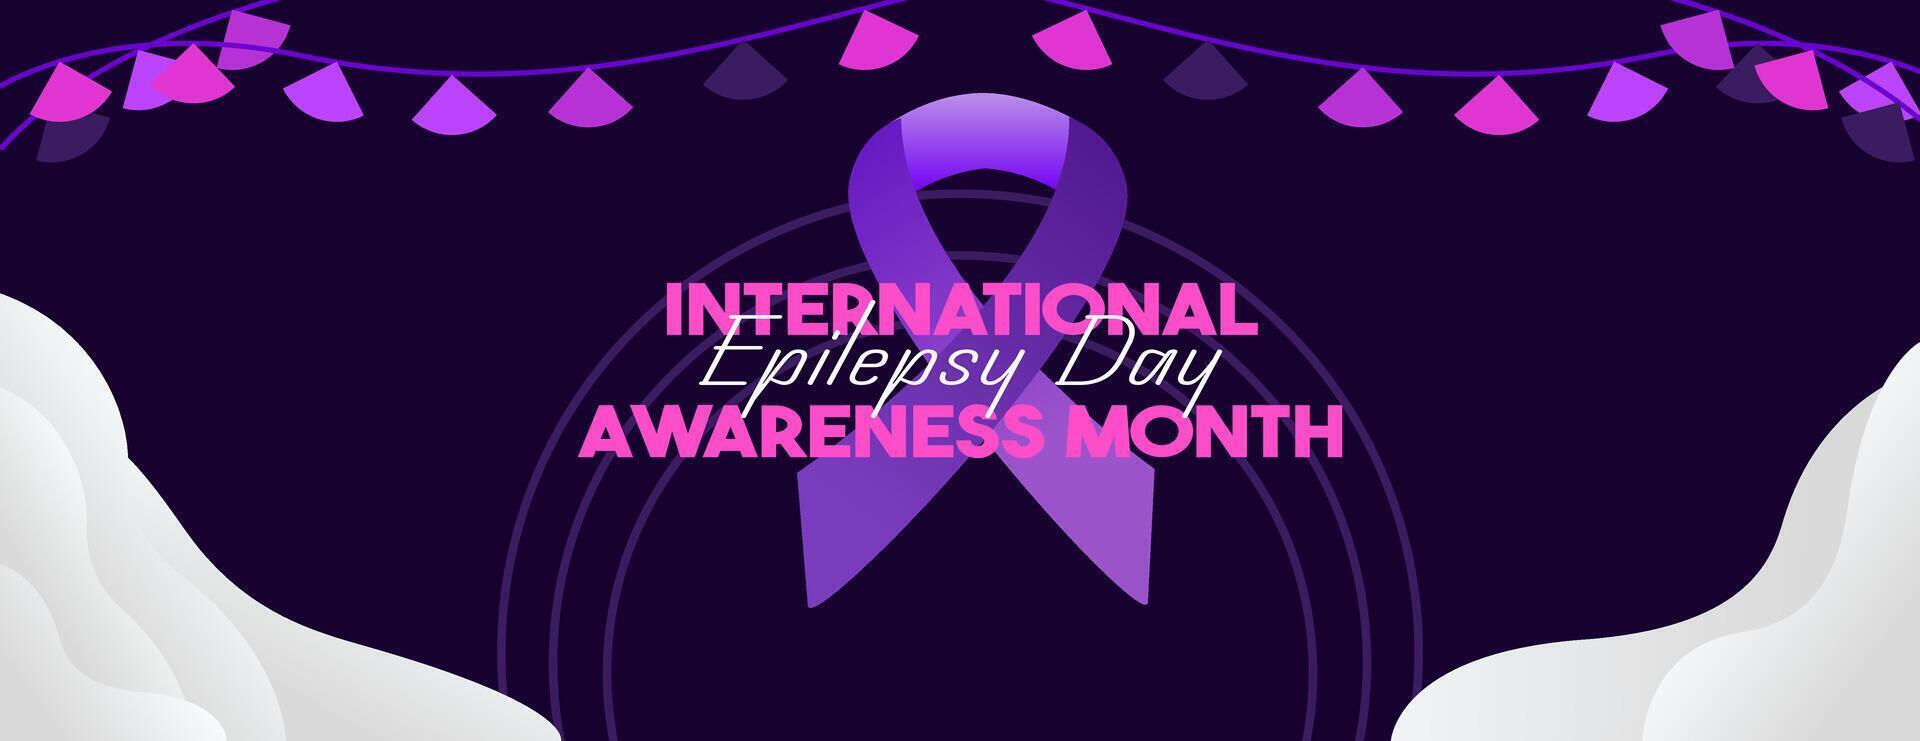 International Epilepsy Day banner with geometric ornament. Raising awareness about epilepsy, improving treatment, for better care. World Epilepsy Day modern background in purple color vector